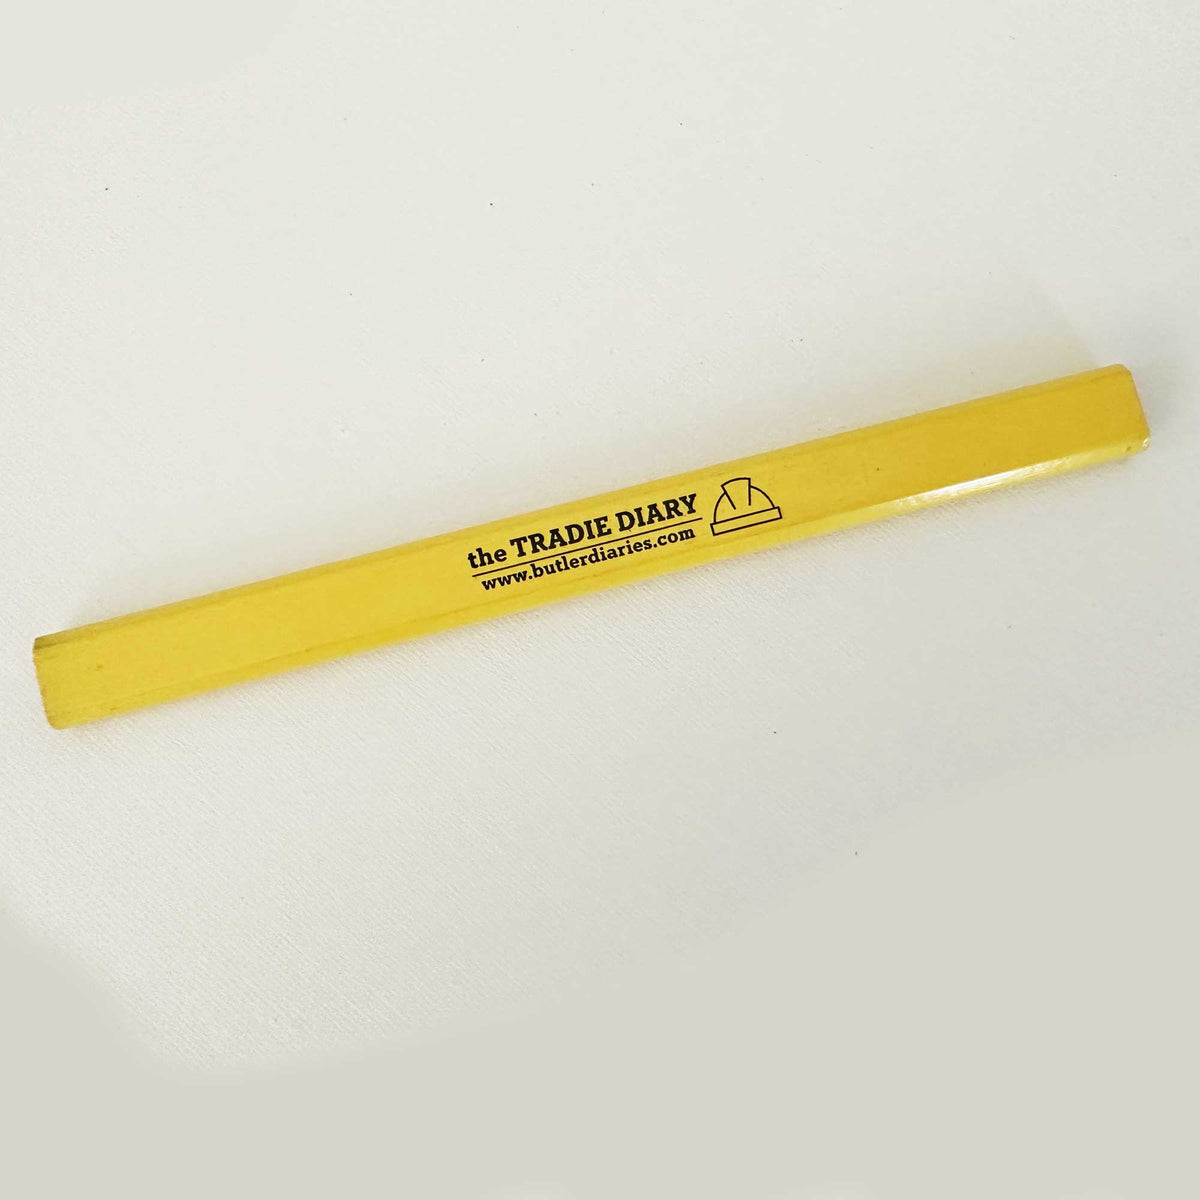 Tradie Diary Construction Pencil